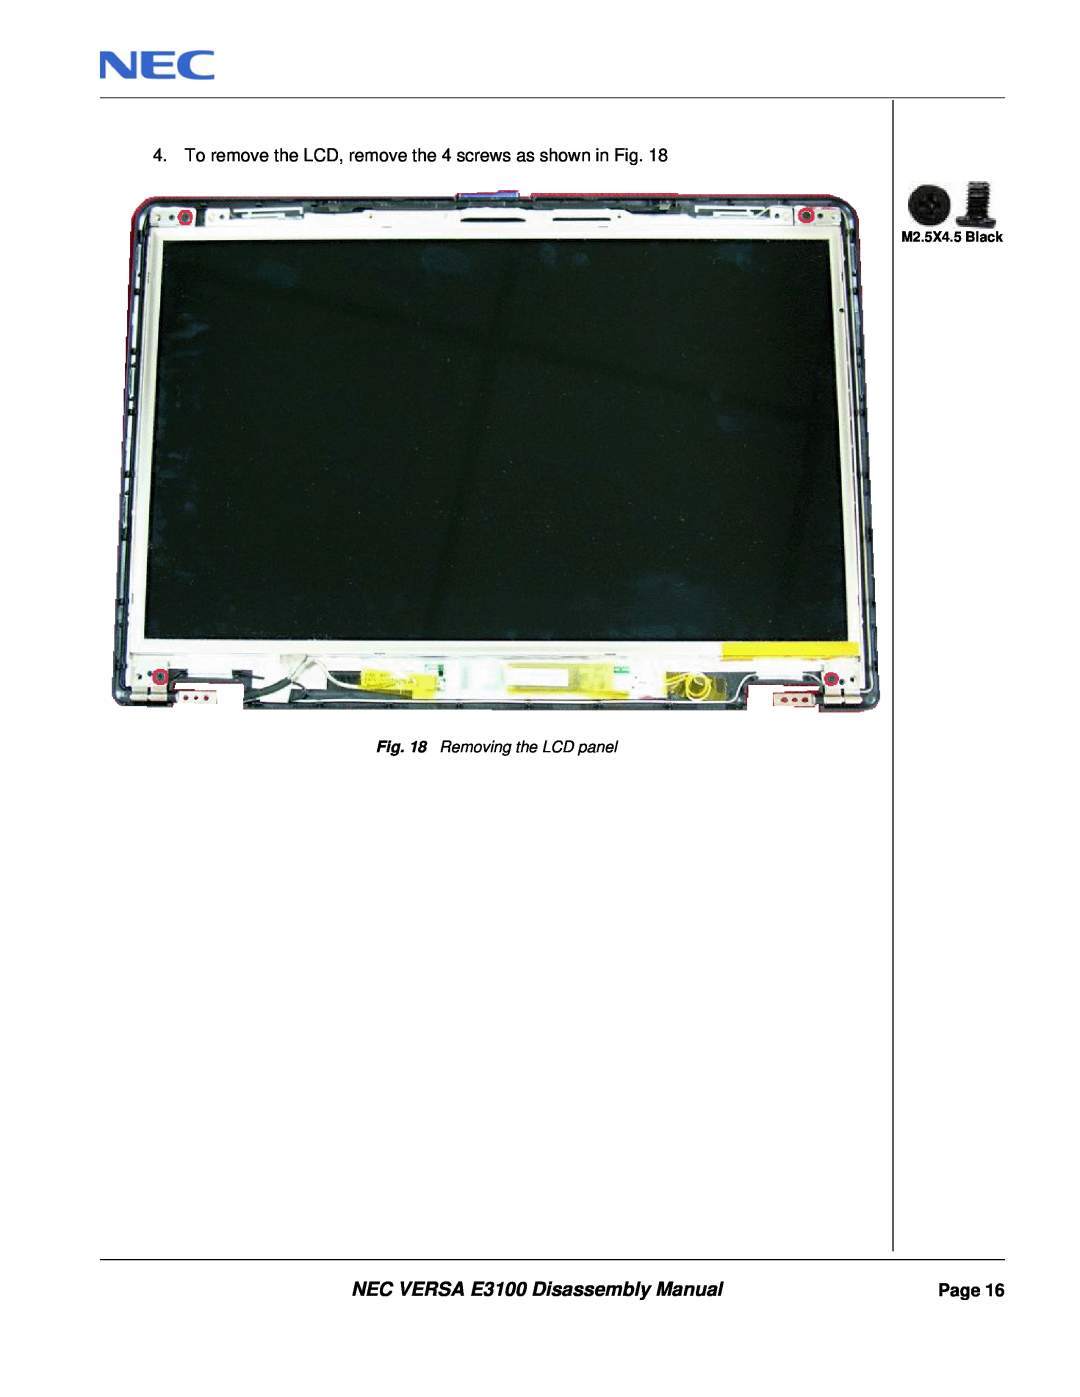 NEC manual NEC VERSA E3100 Disassembly Manual, Removing the LCD panel, Page, M2.5X4.5 Black 